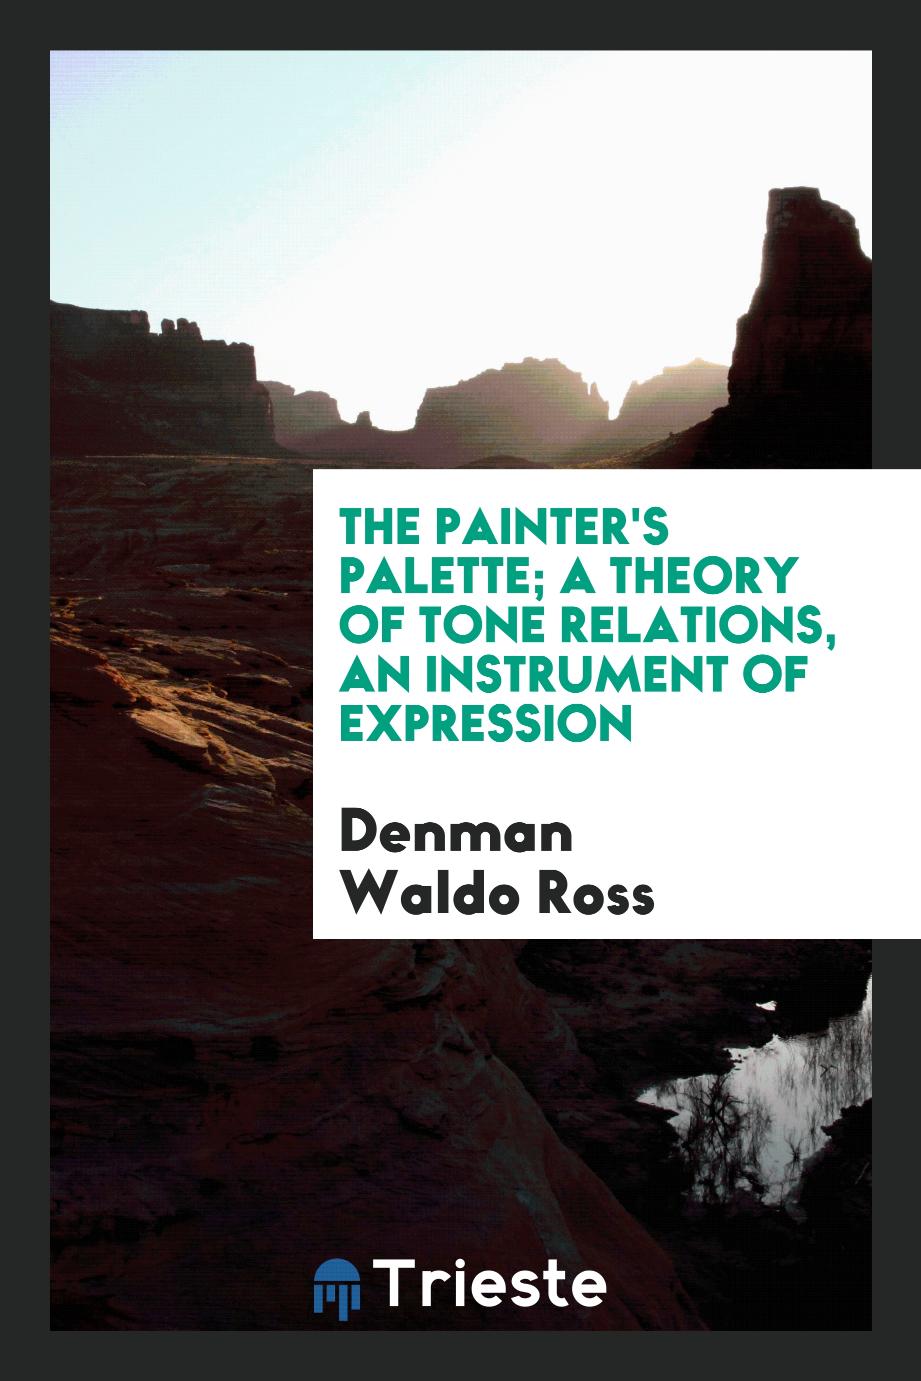 The painter's palette; a theory of tone relations, an instrument of expression